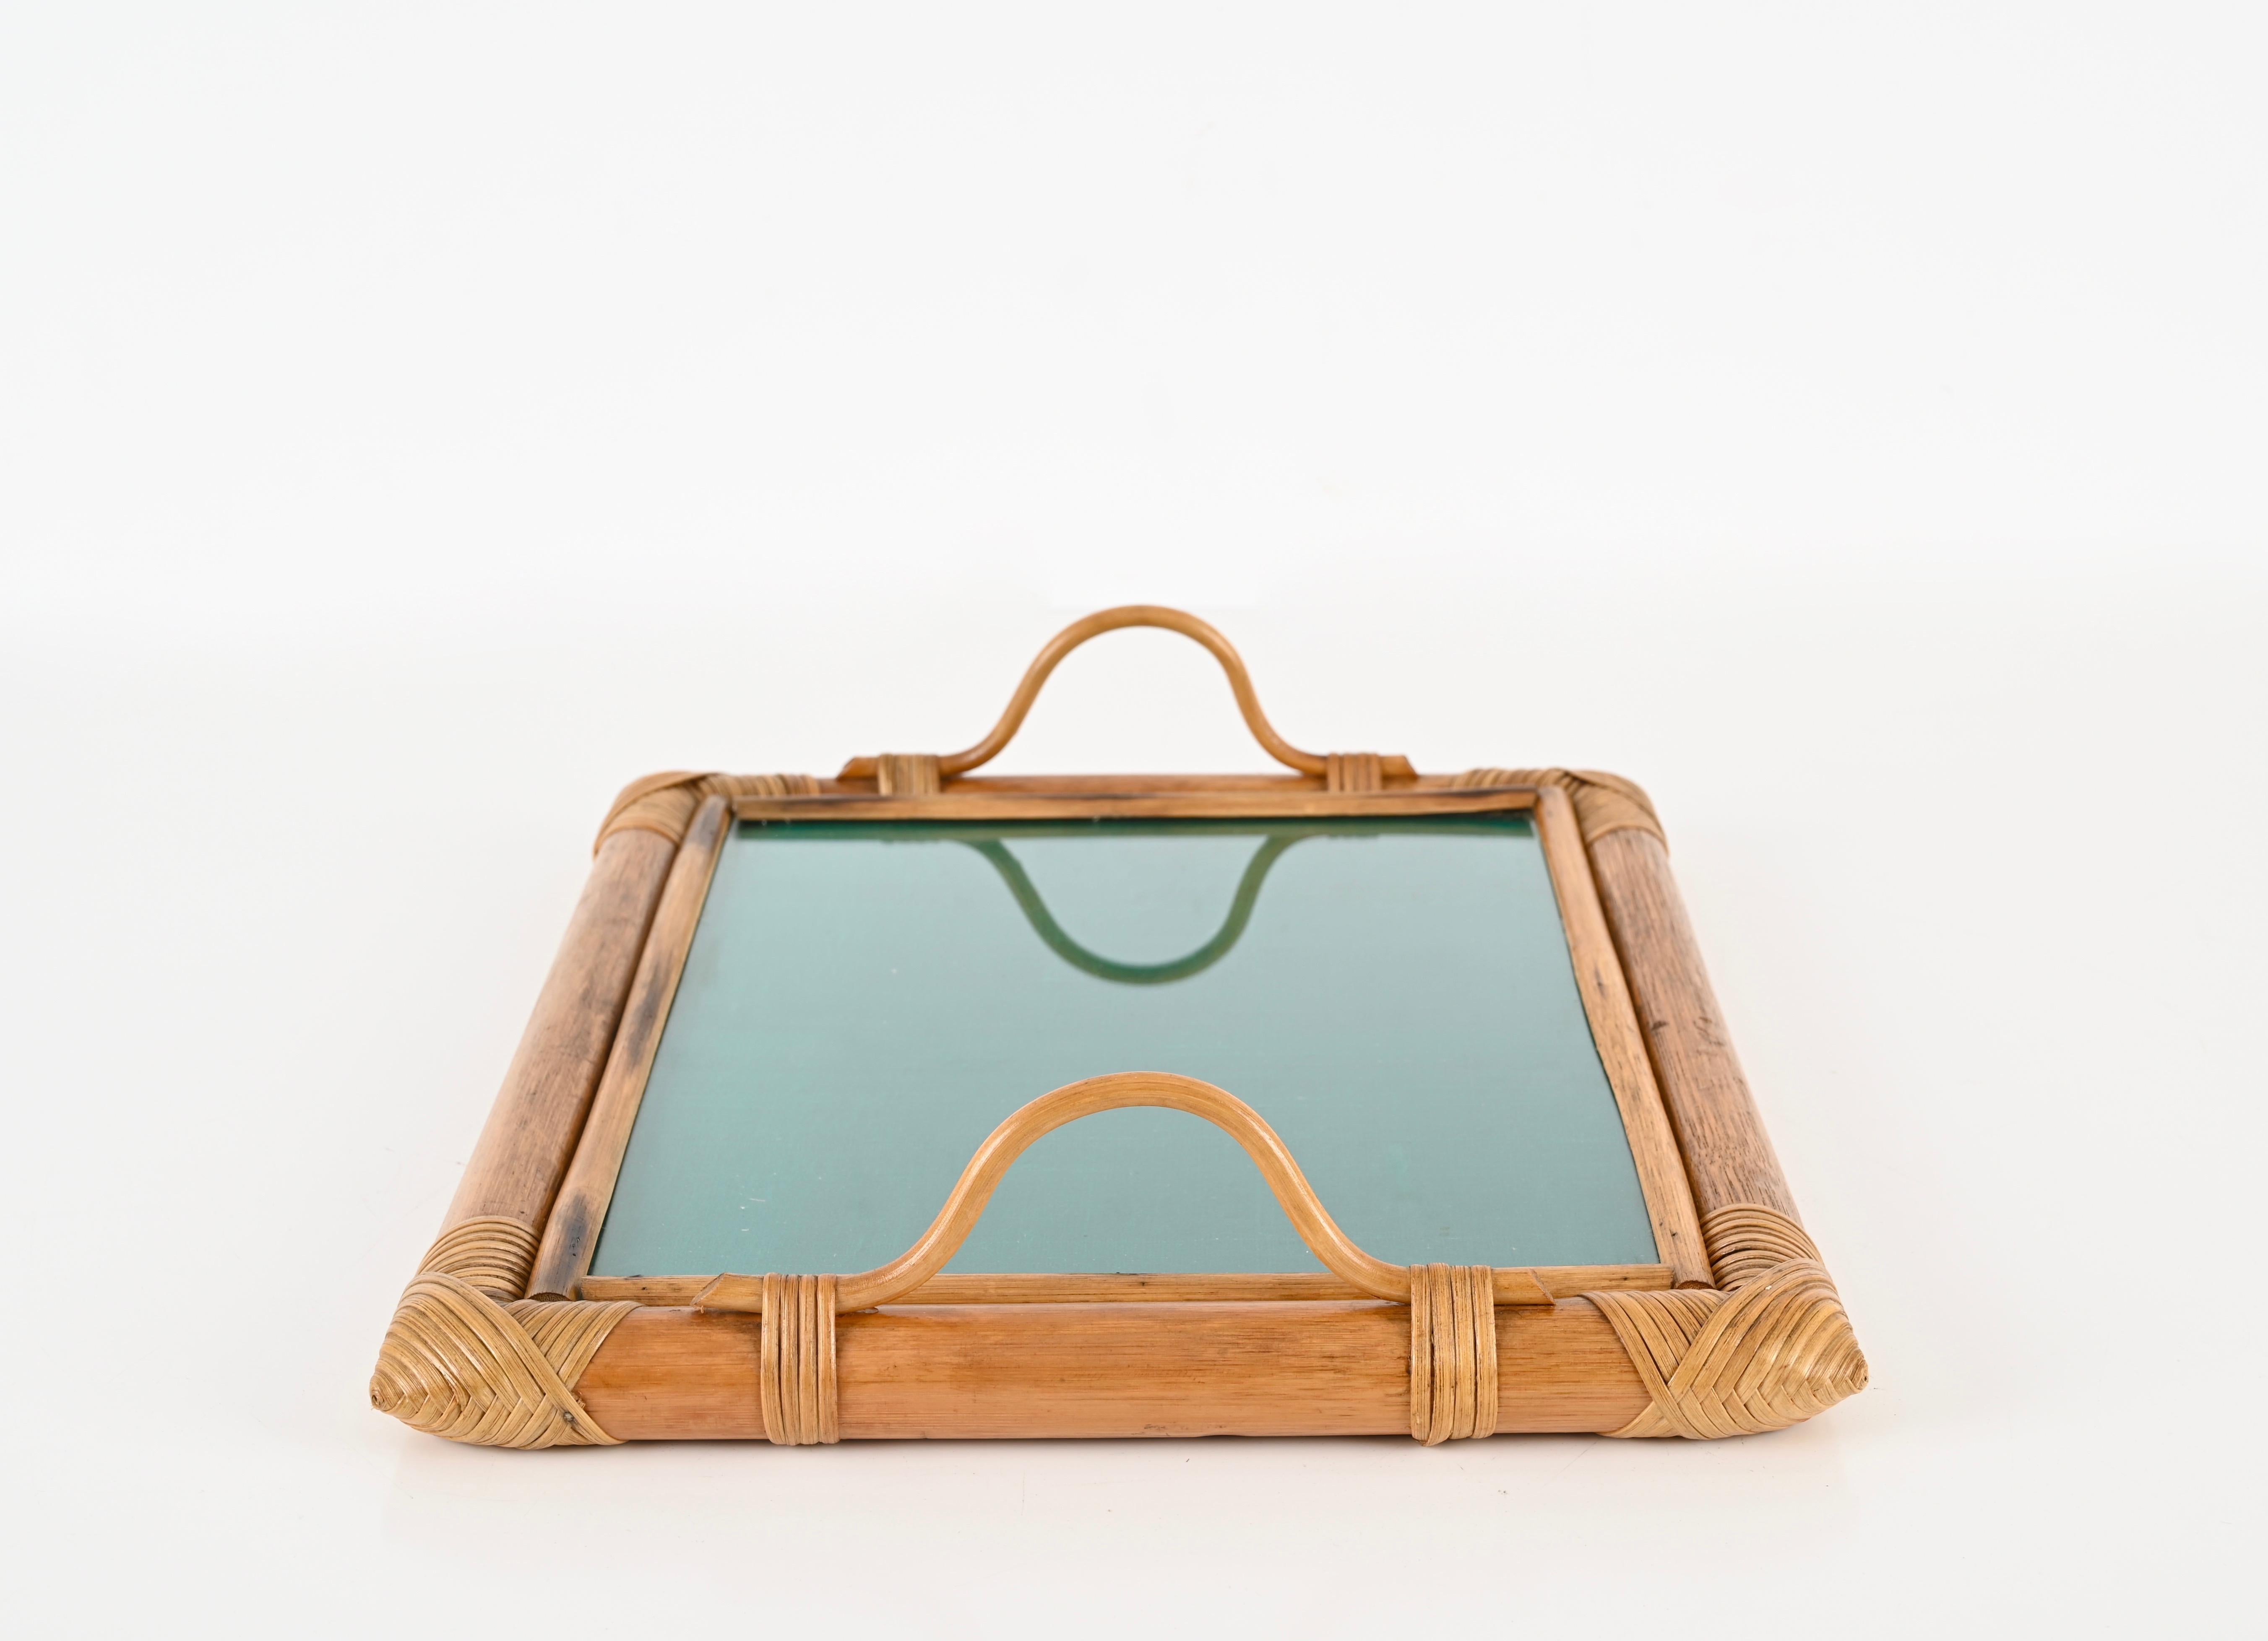 French Riviera Serving Tray in Bamboo and Rattan W/ Green Interior, Italy 1970s For Sale 1